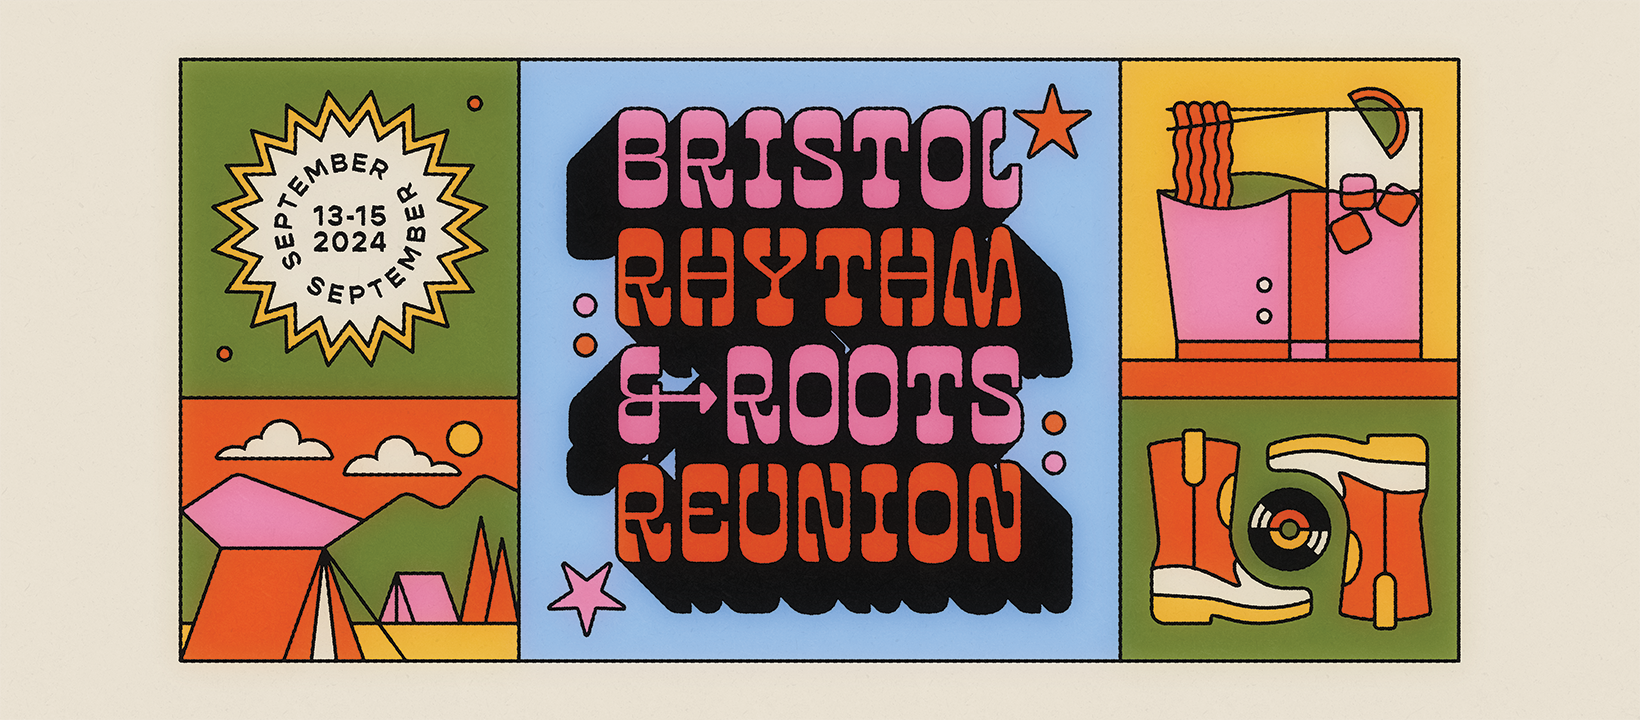 Bristol Rhythm & Roots Reunion Reveals Initial 2024 Lineup: 49 Winchester, Ashley McBryde, The Wallflowers & More